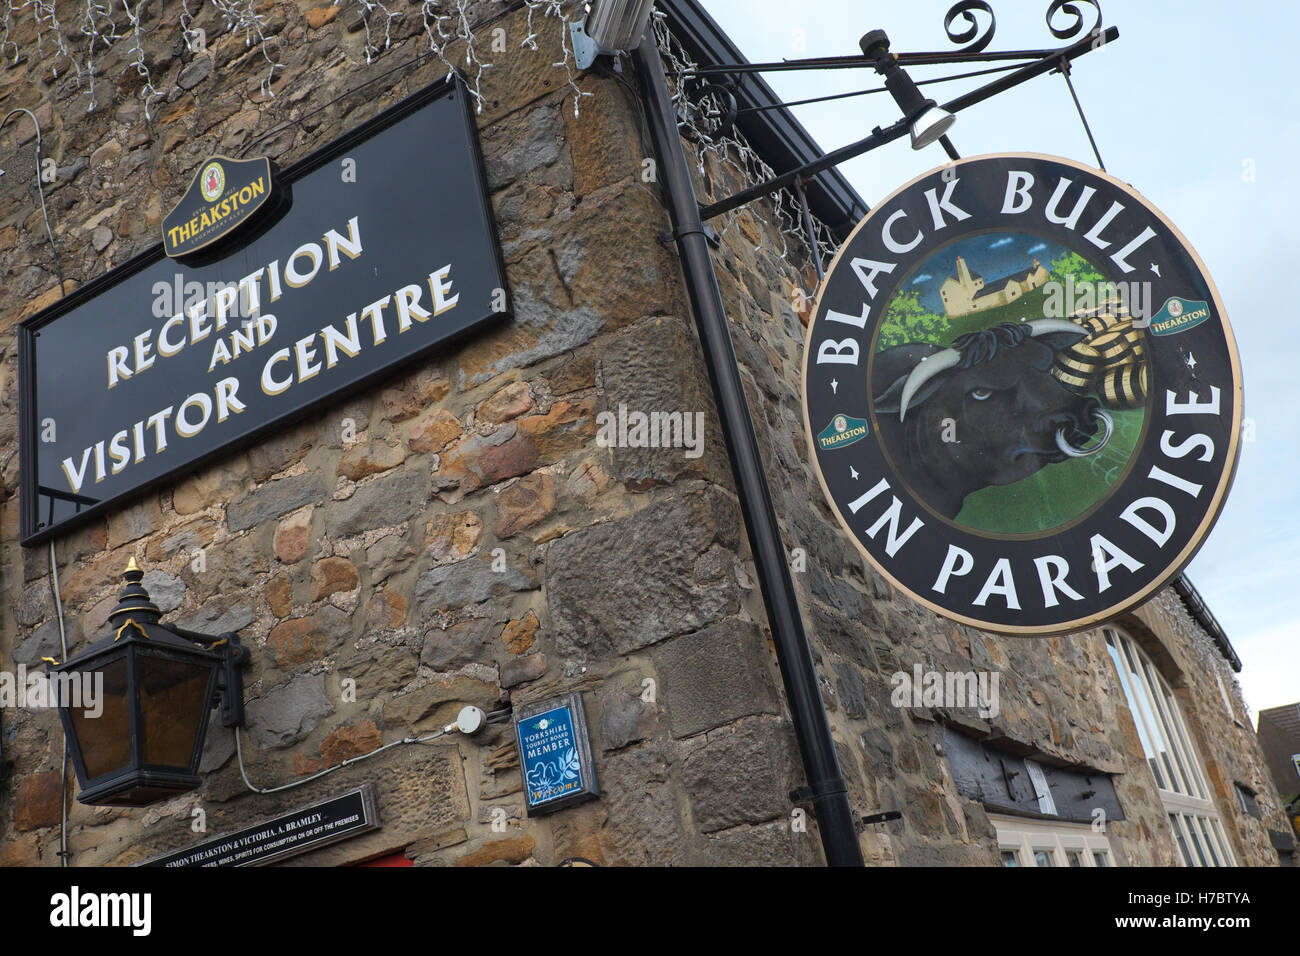 Masham North Yorkshire the Black Bull in Paradise brewery tap pub at the Theakston brewery UK Stock Photo